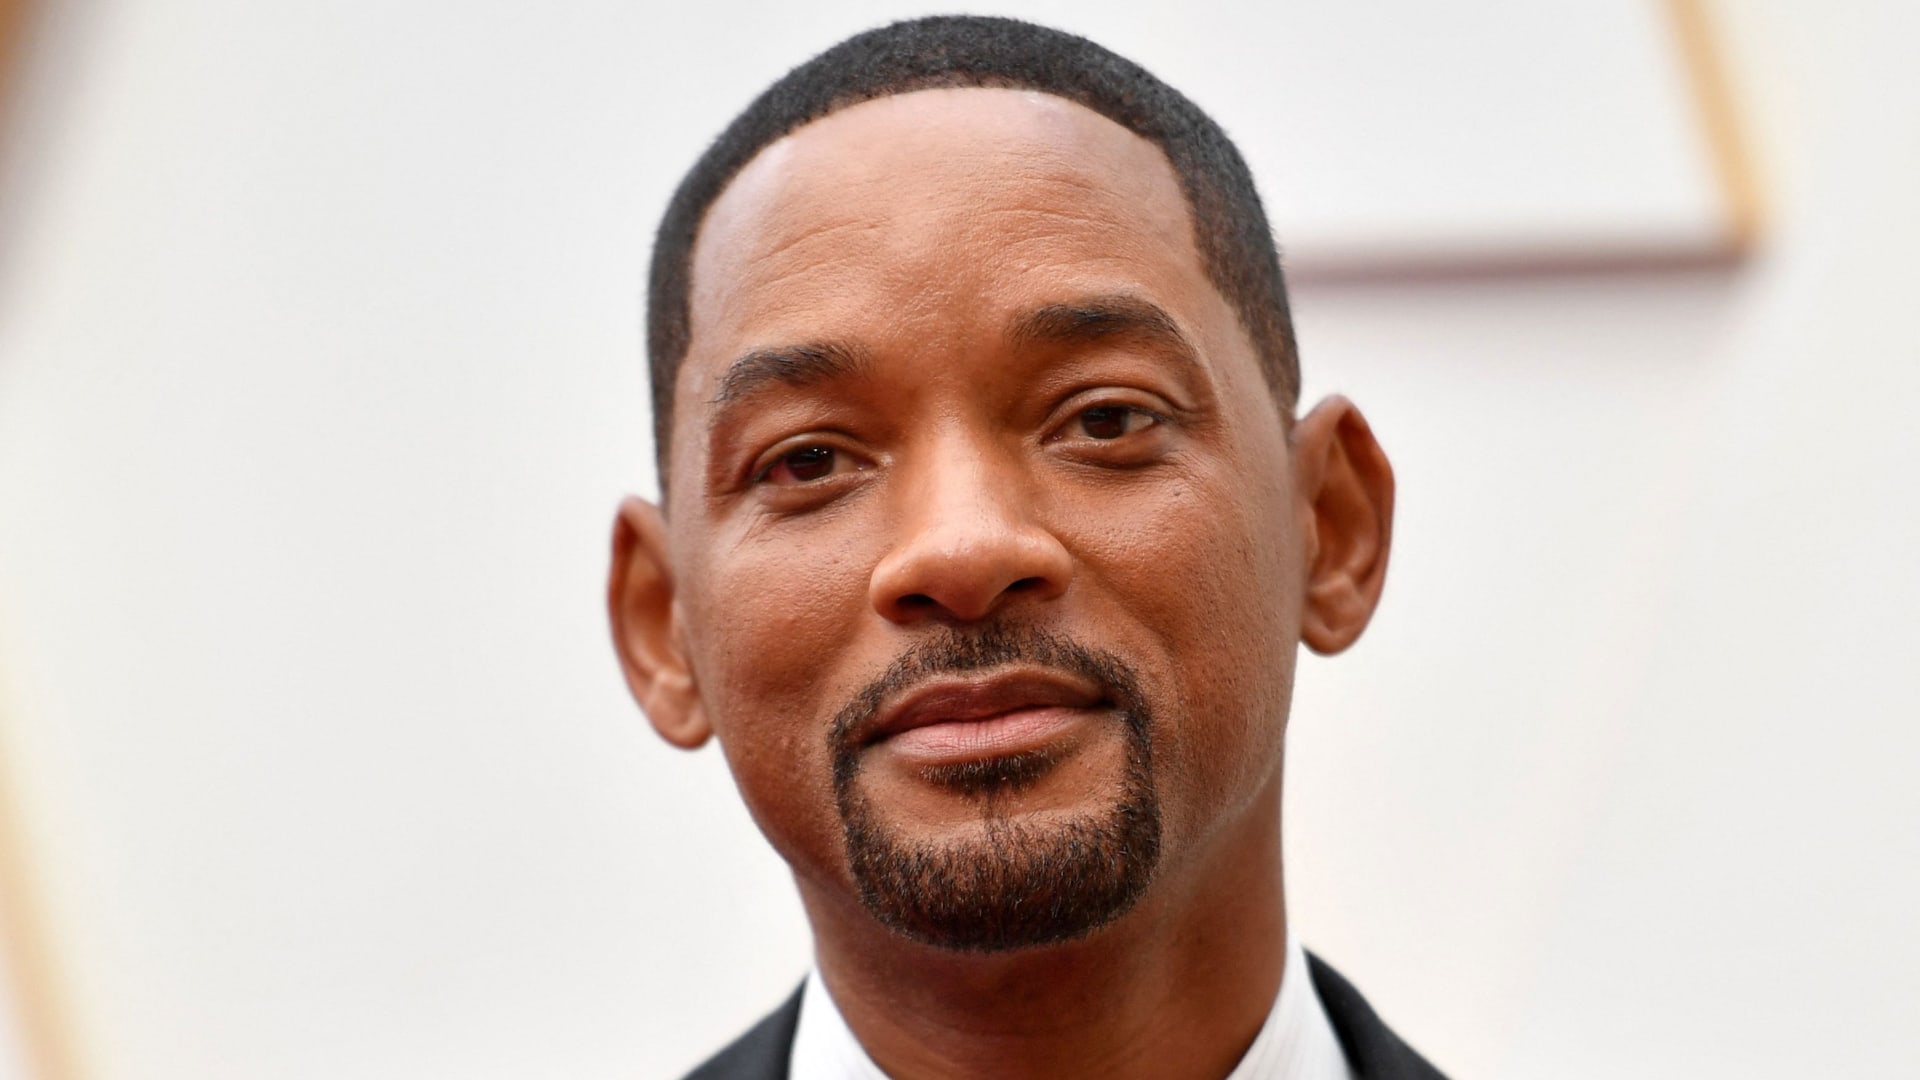 Will Smith attends the 94th Oscars at the Dolby Theatre in Hollywood, California.